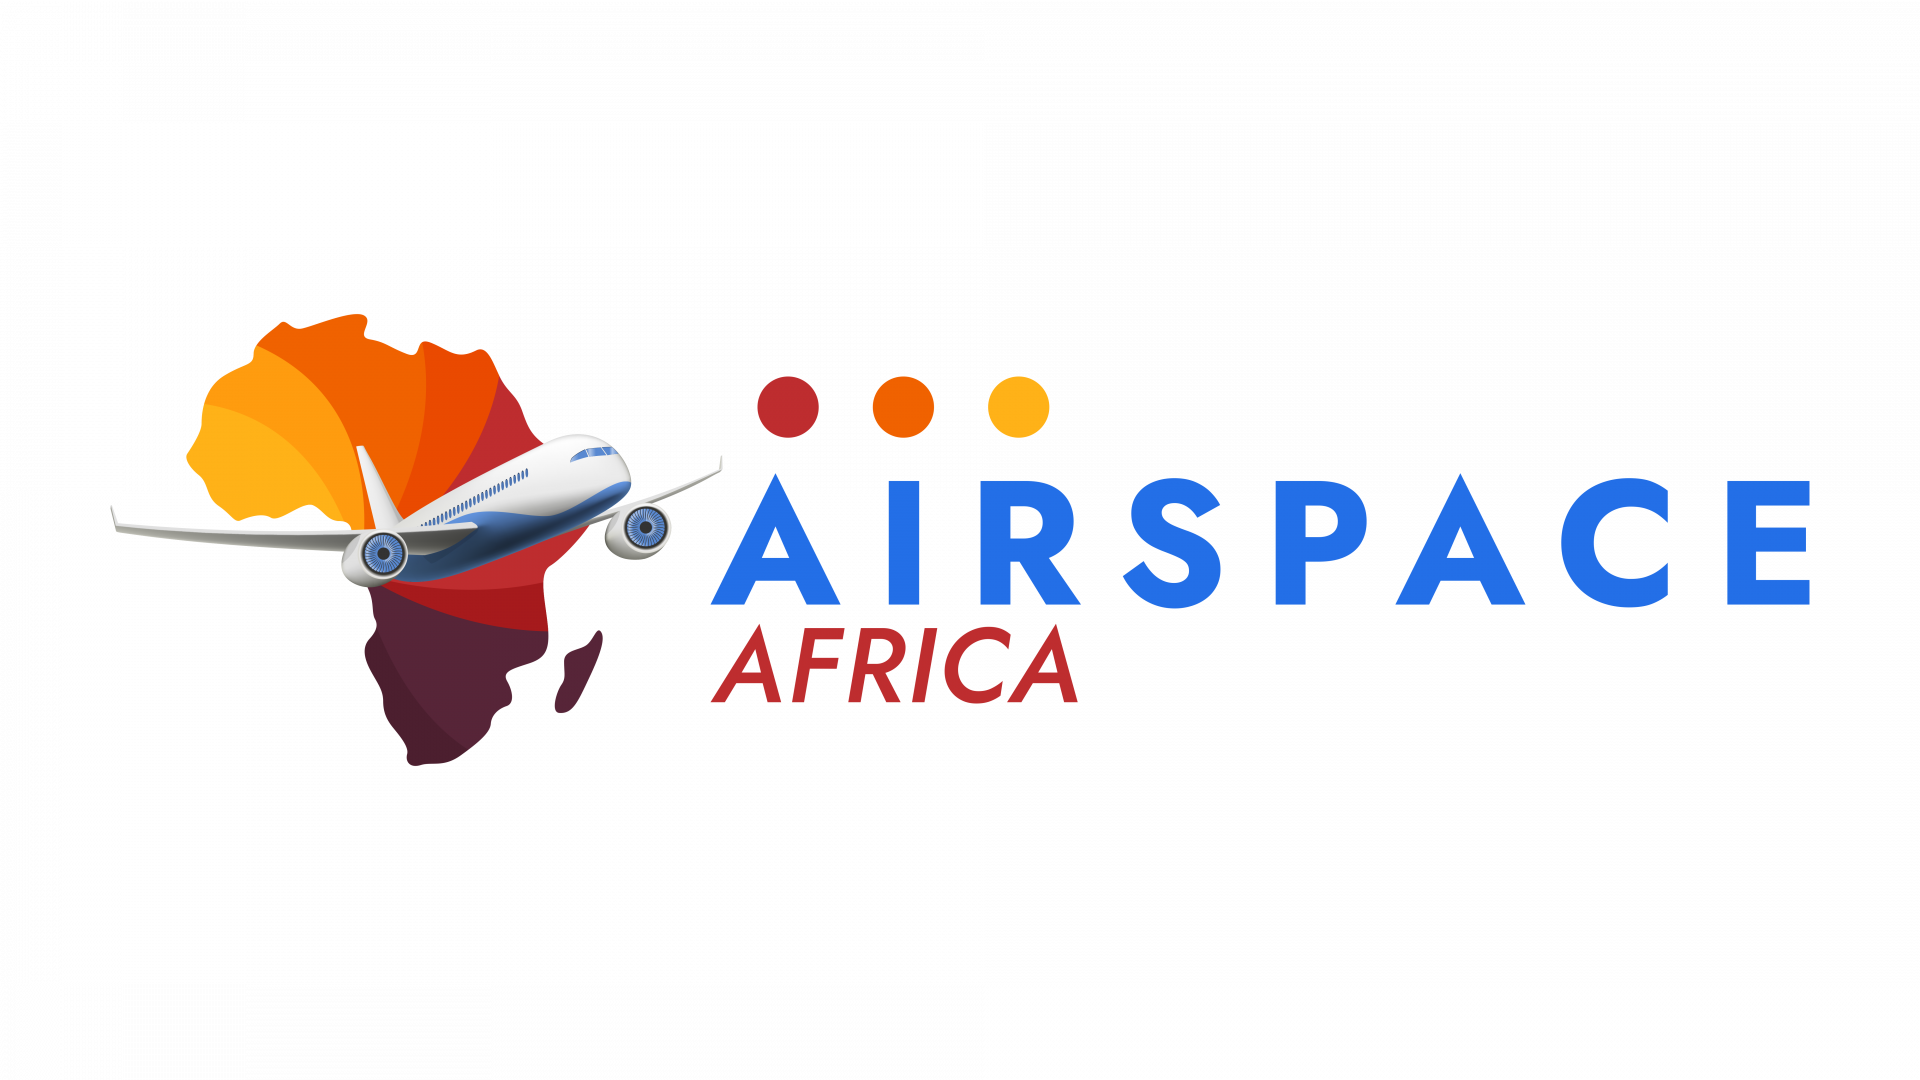 Airspace Africa